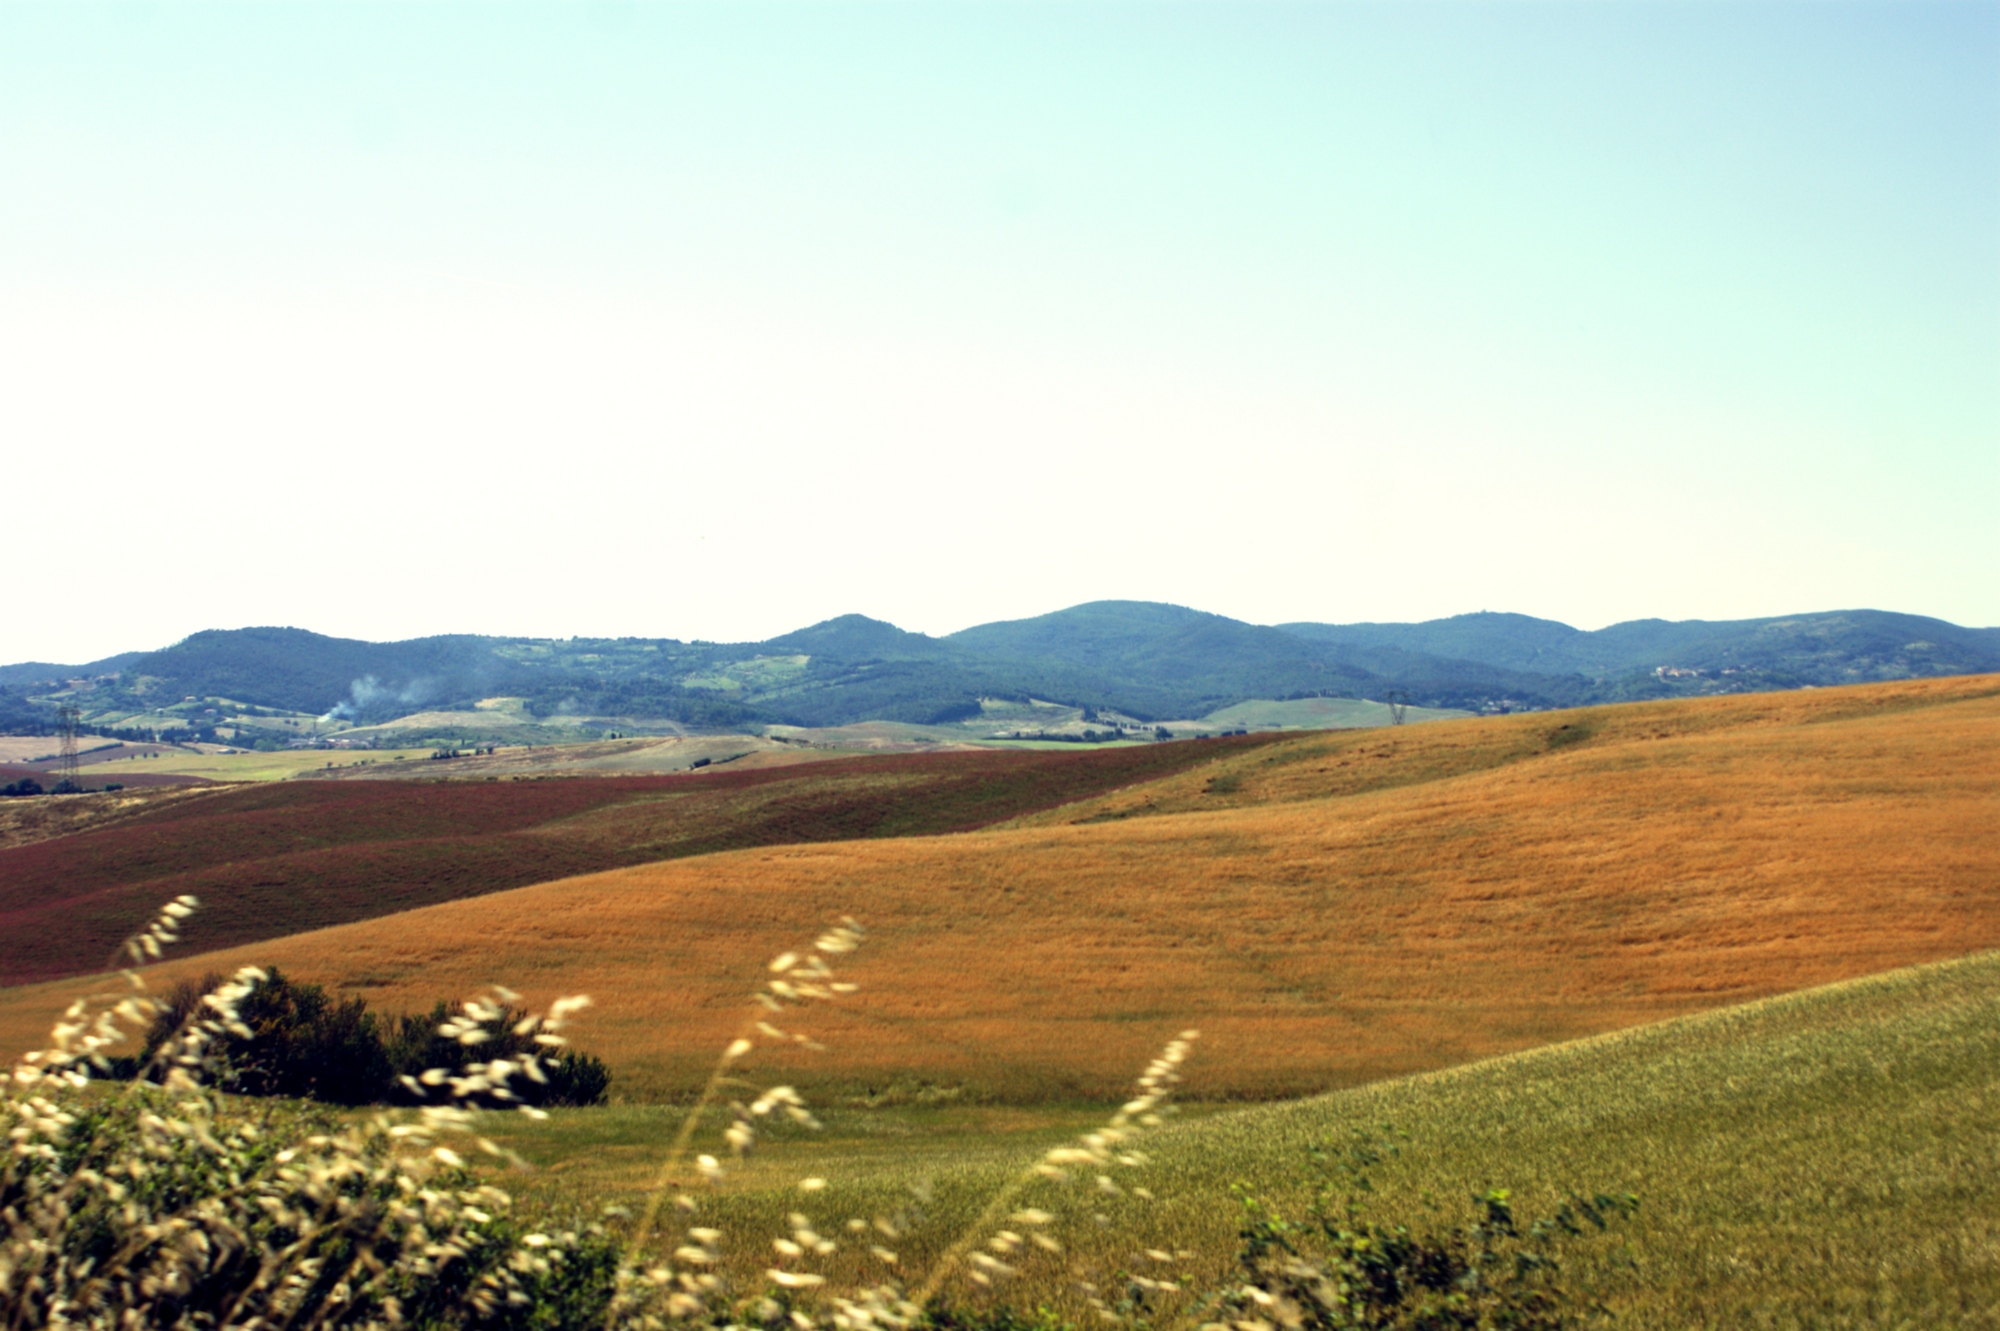 The colors of Maremma